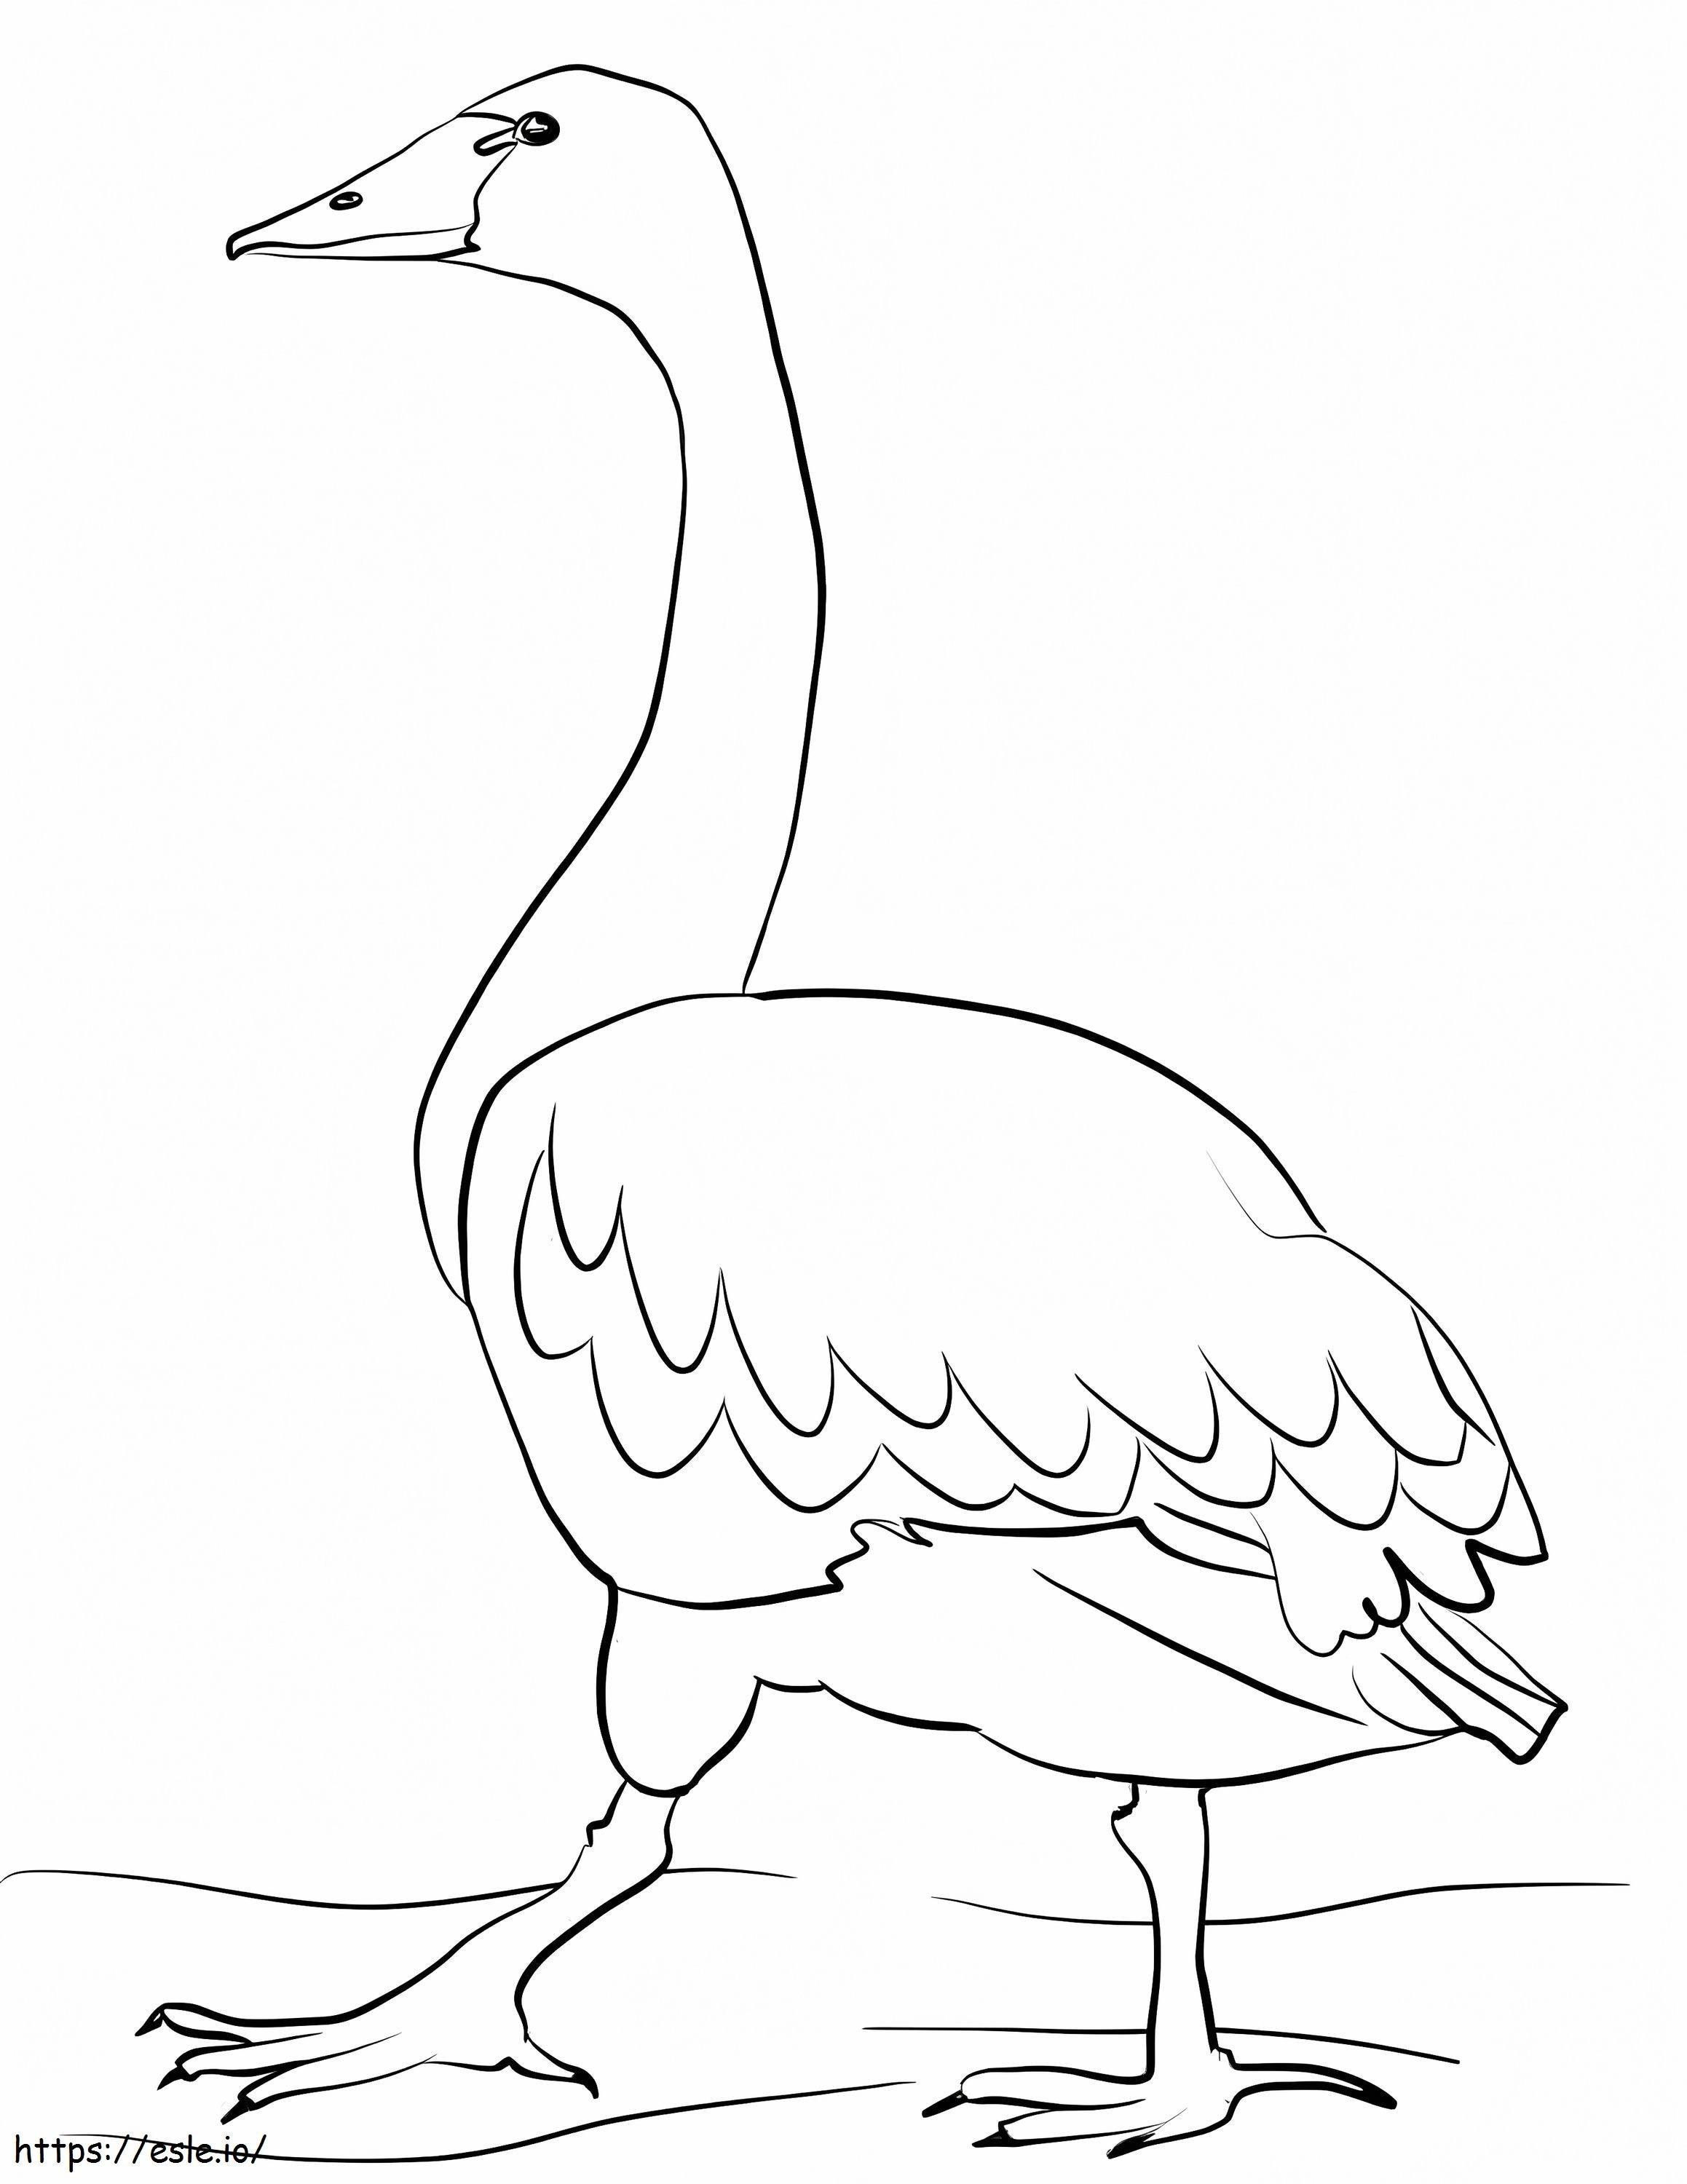 Tundra Swan coloring page